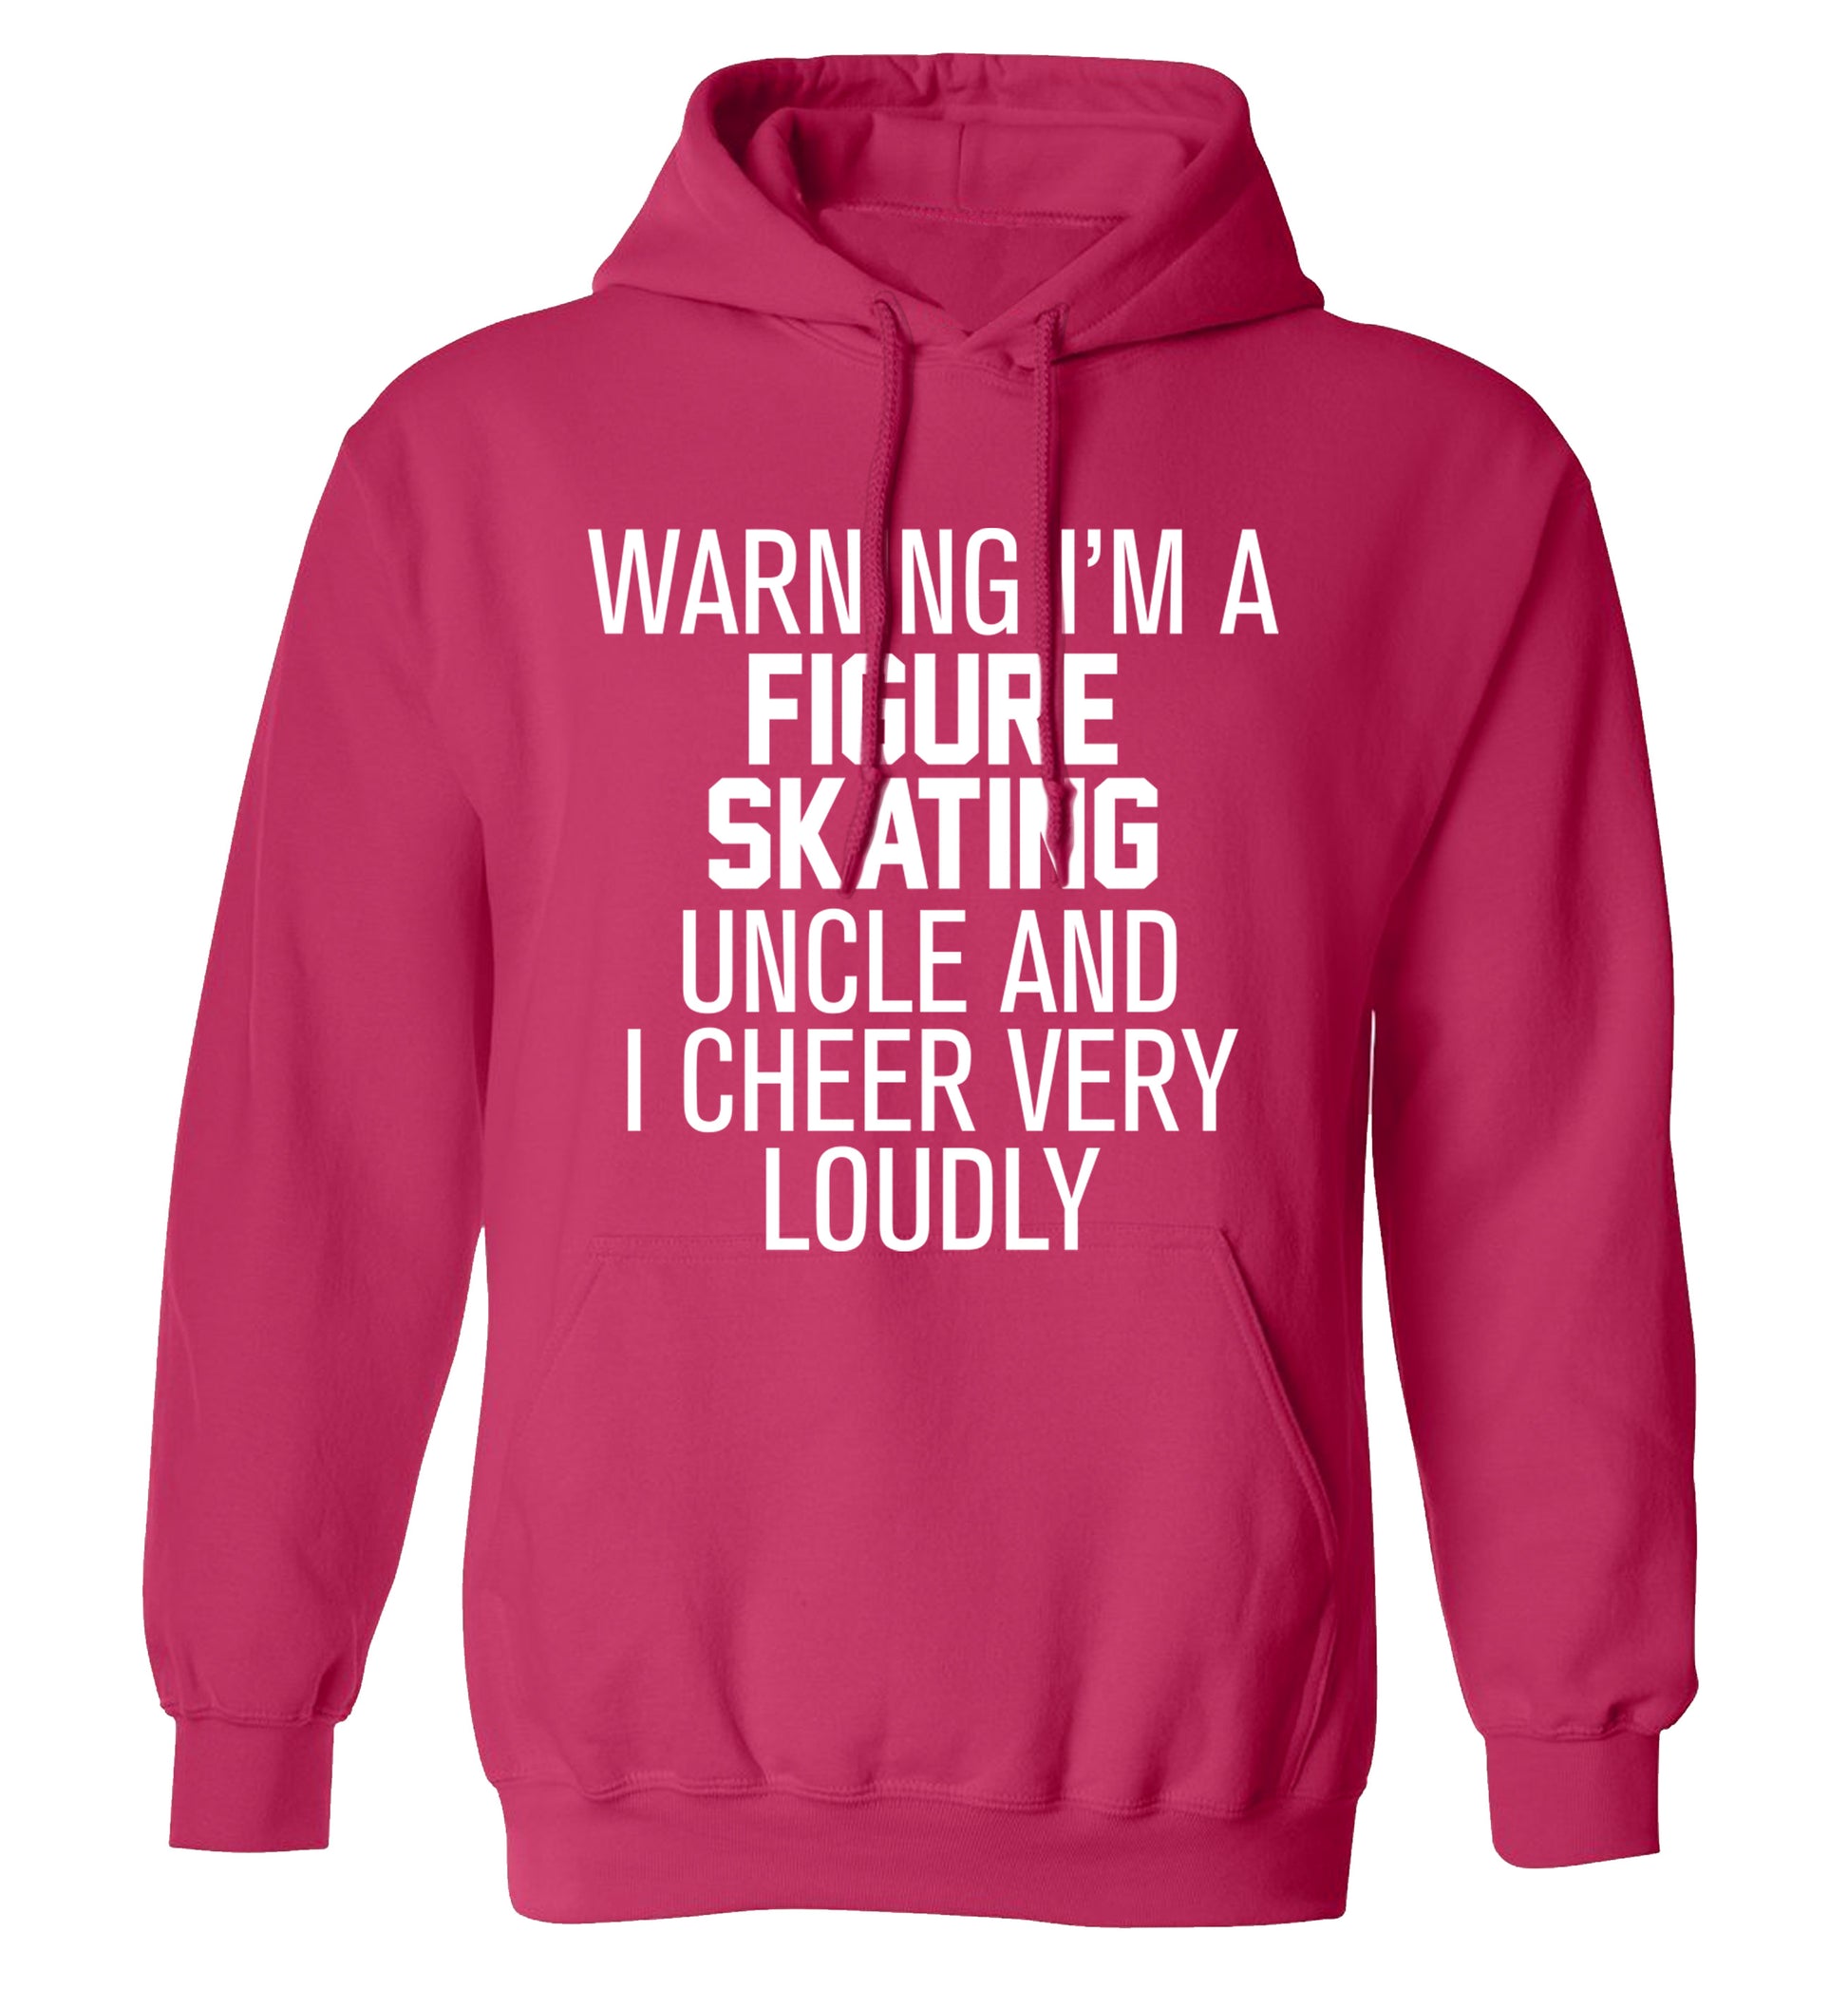 Warning I'm a figure skating uncle and I cheer very loudly adults unisexpink hoodie 2XL